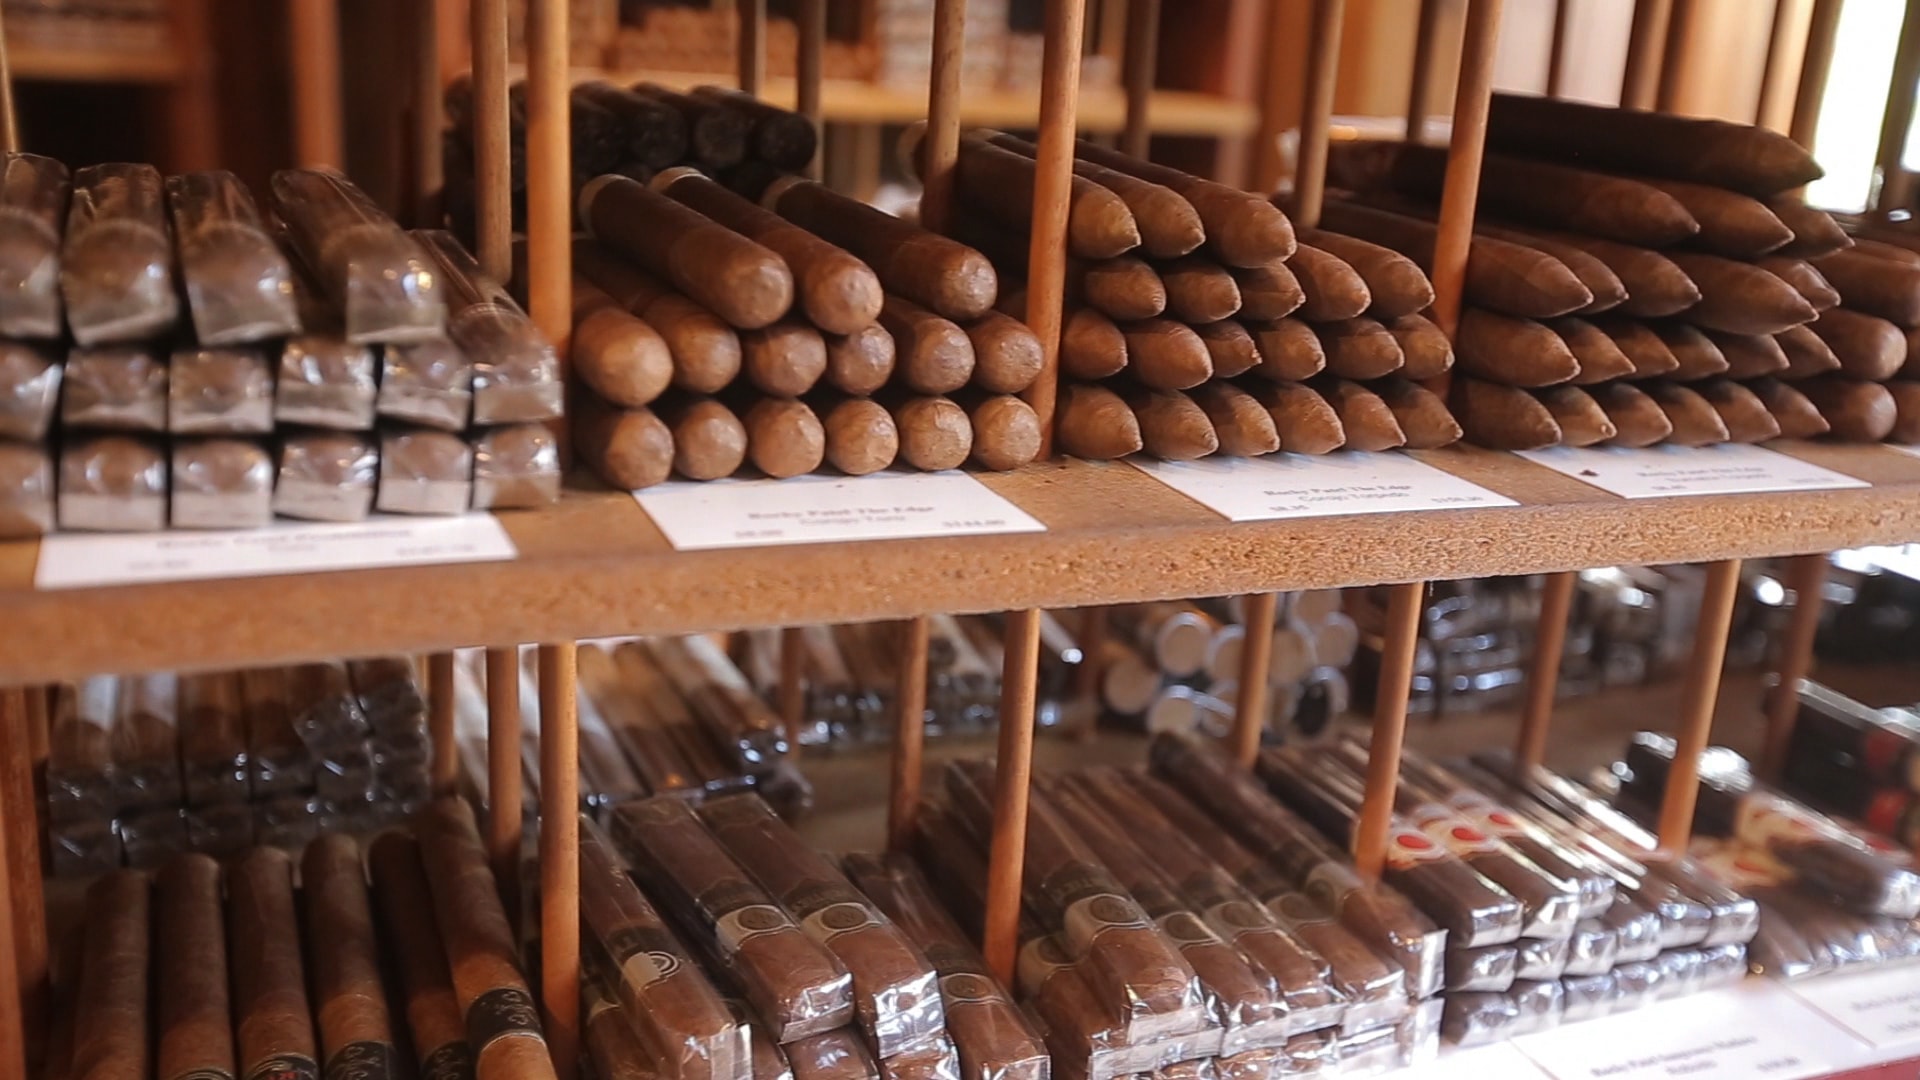 The big business behind counterfeit Dominican Cigars